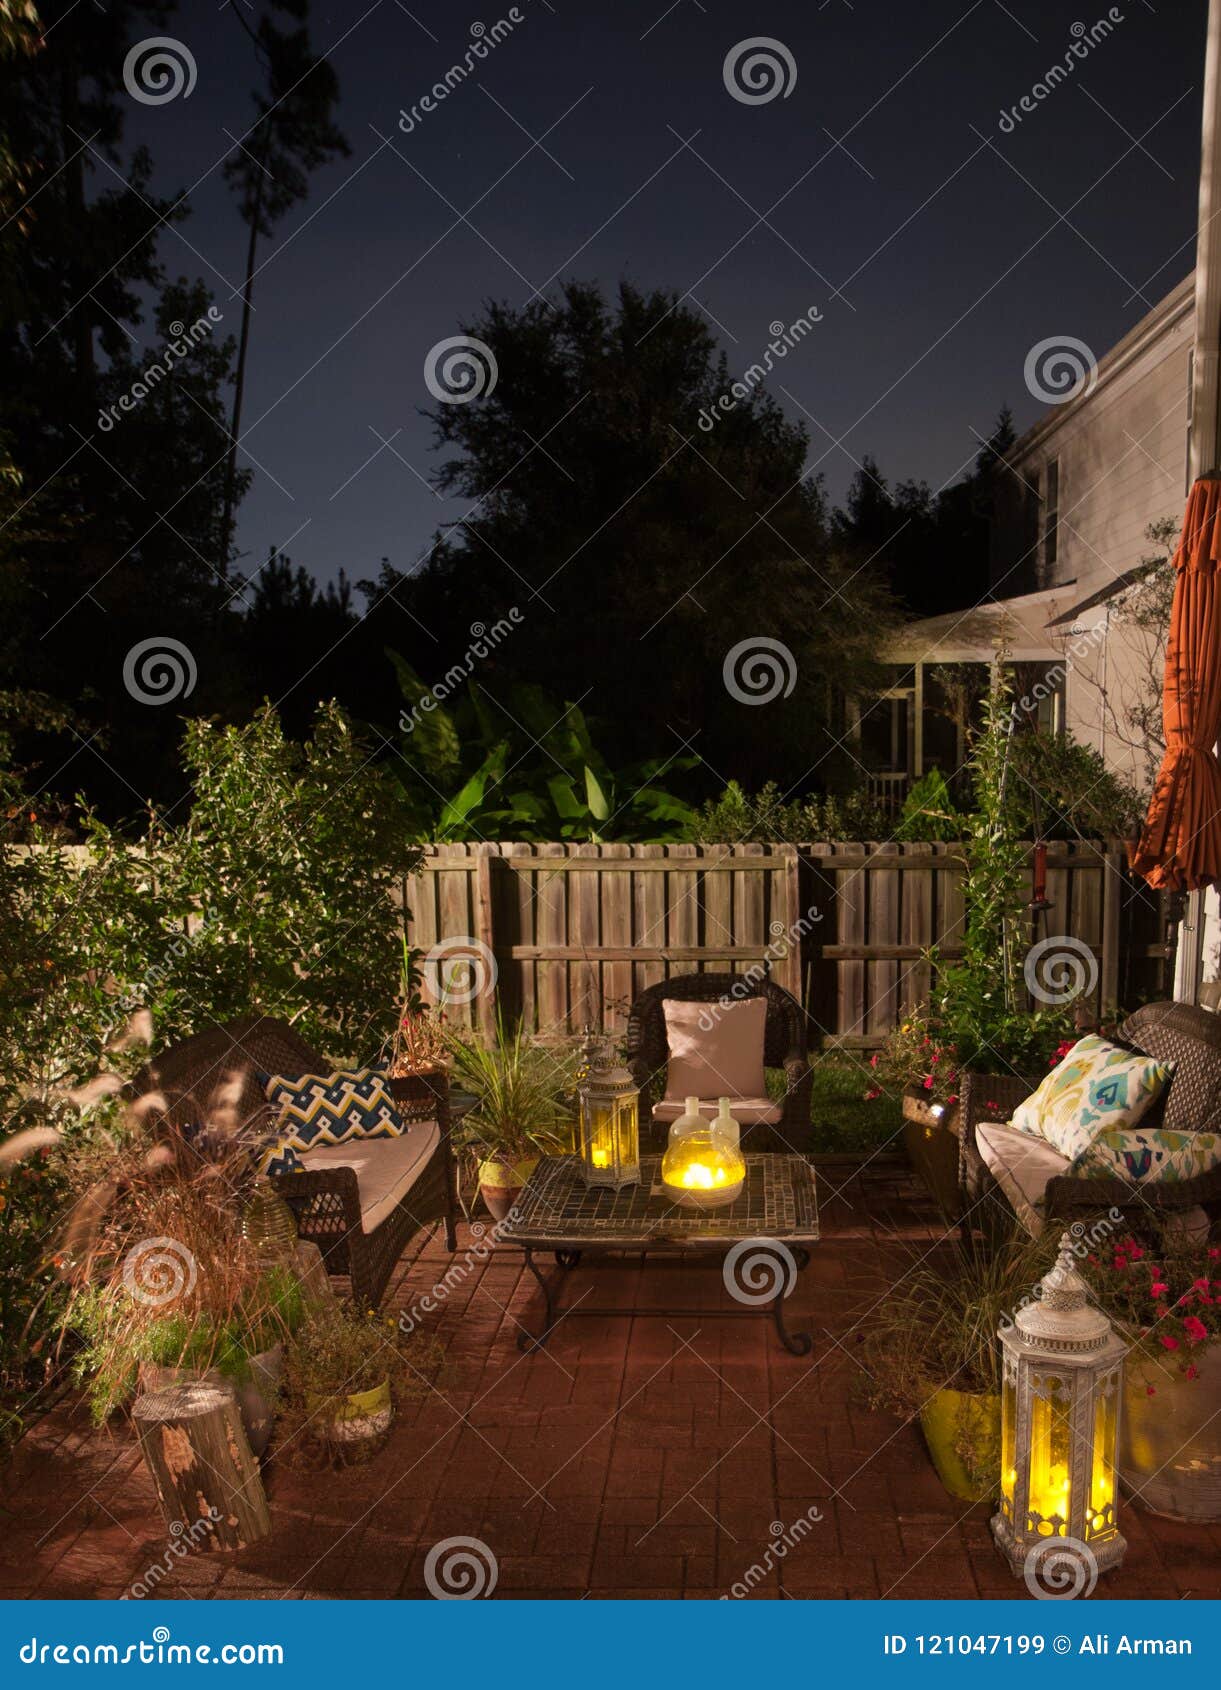 Night Scene In The Back Yard Porch Stock Image Image Of Building Plant 121047199